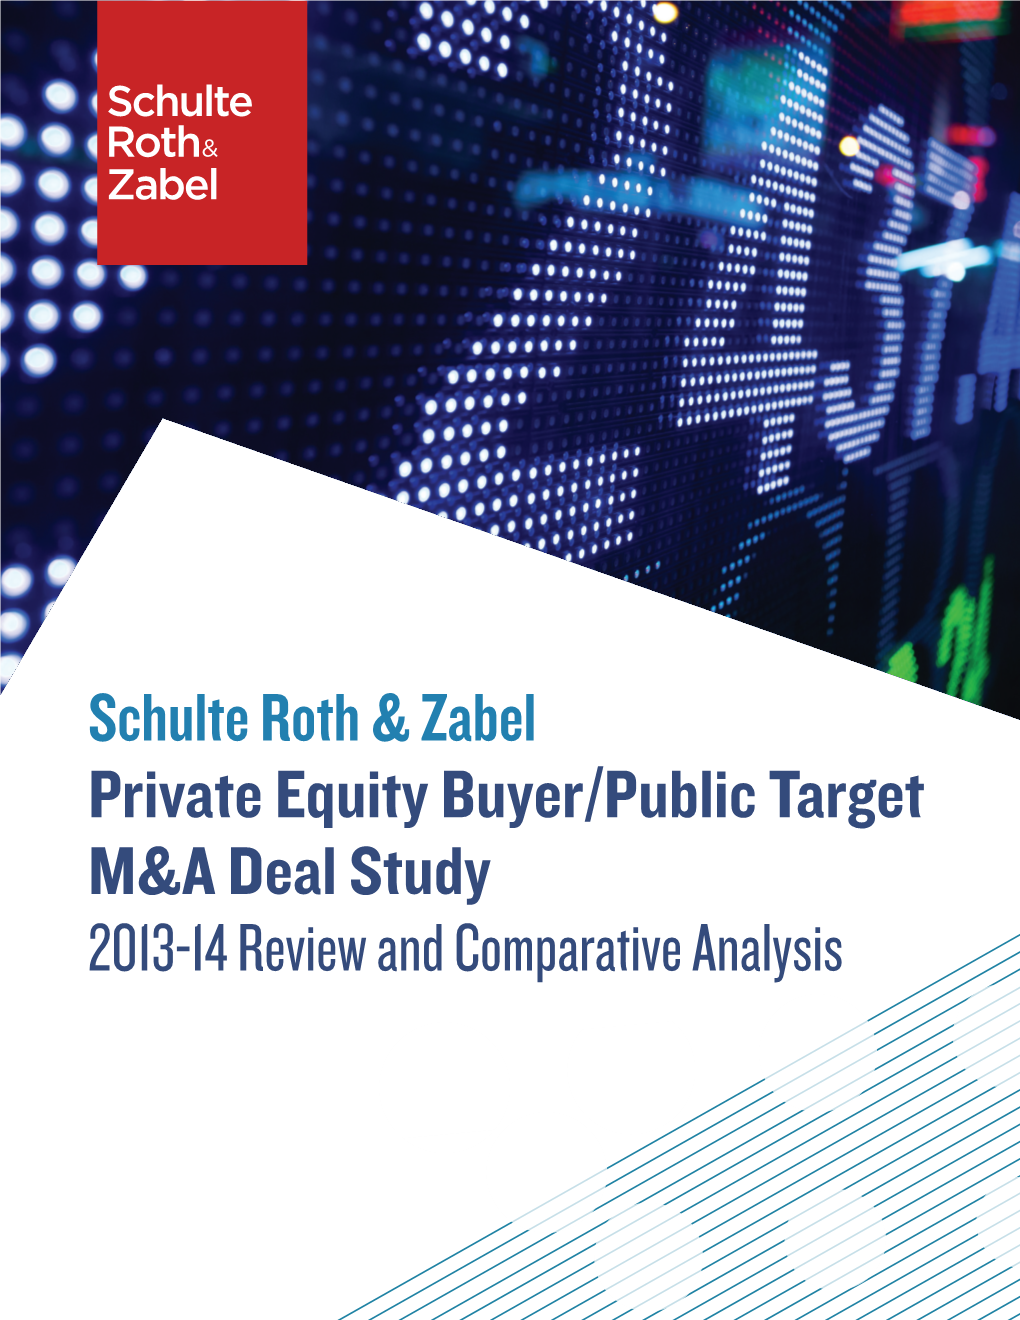 Schulte Roth & Zabel Private Equity Buyer/Public Target M&A Deal